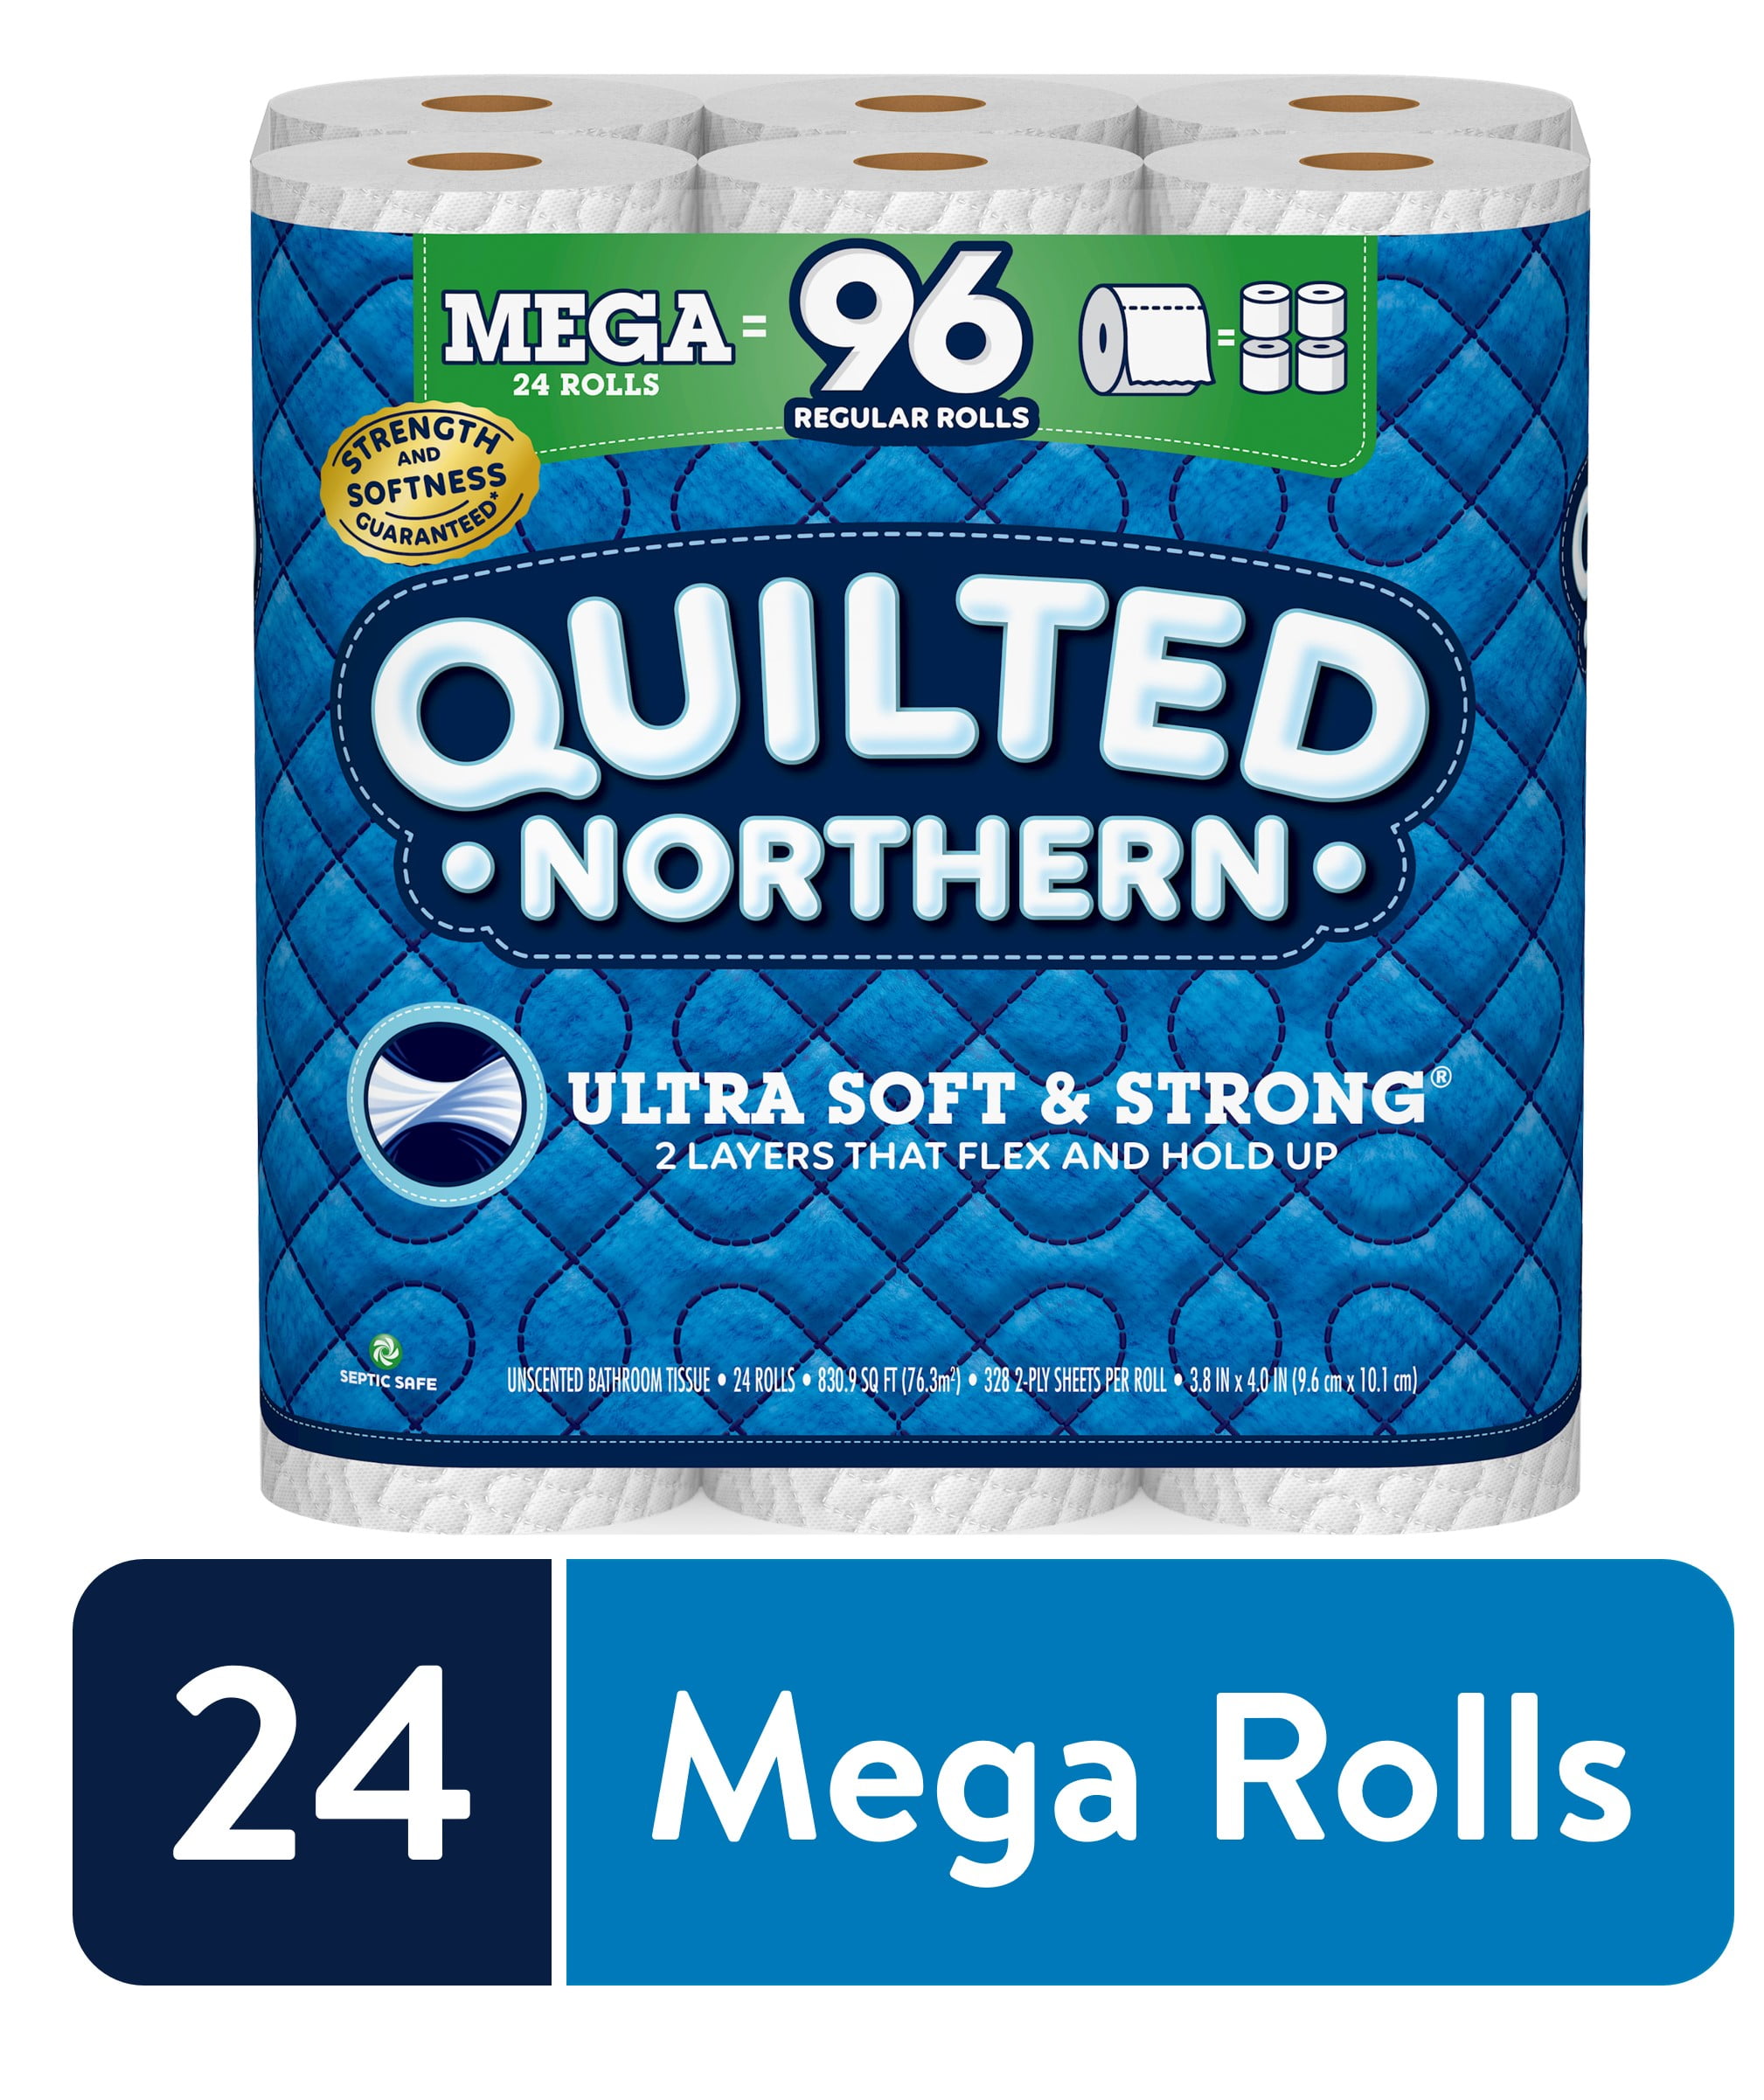 = 48 Regular R 12 Mega Rolls Quilted Northern Ultra Soft & Strong Toilet Paper 